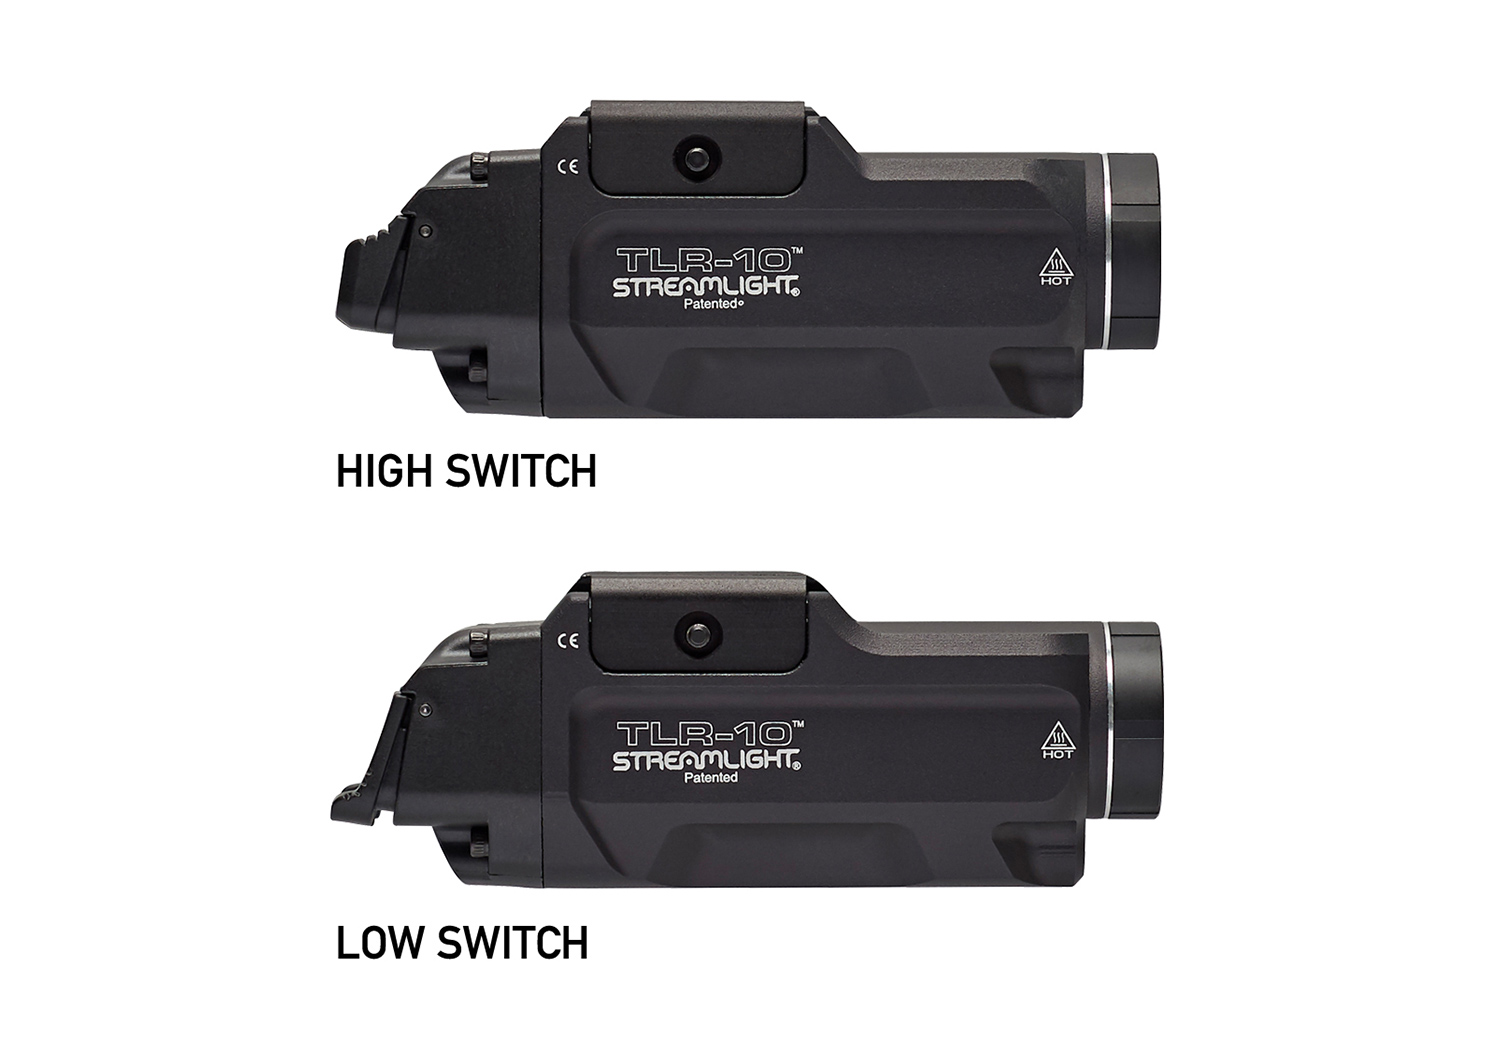 Streamlightâ have introduced the TLR-10™, a 1,000-lumen full-frame weapon-mounted tactical light with an integrated red aiming laser